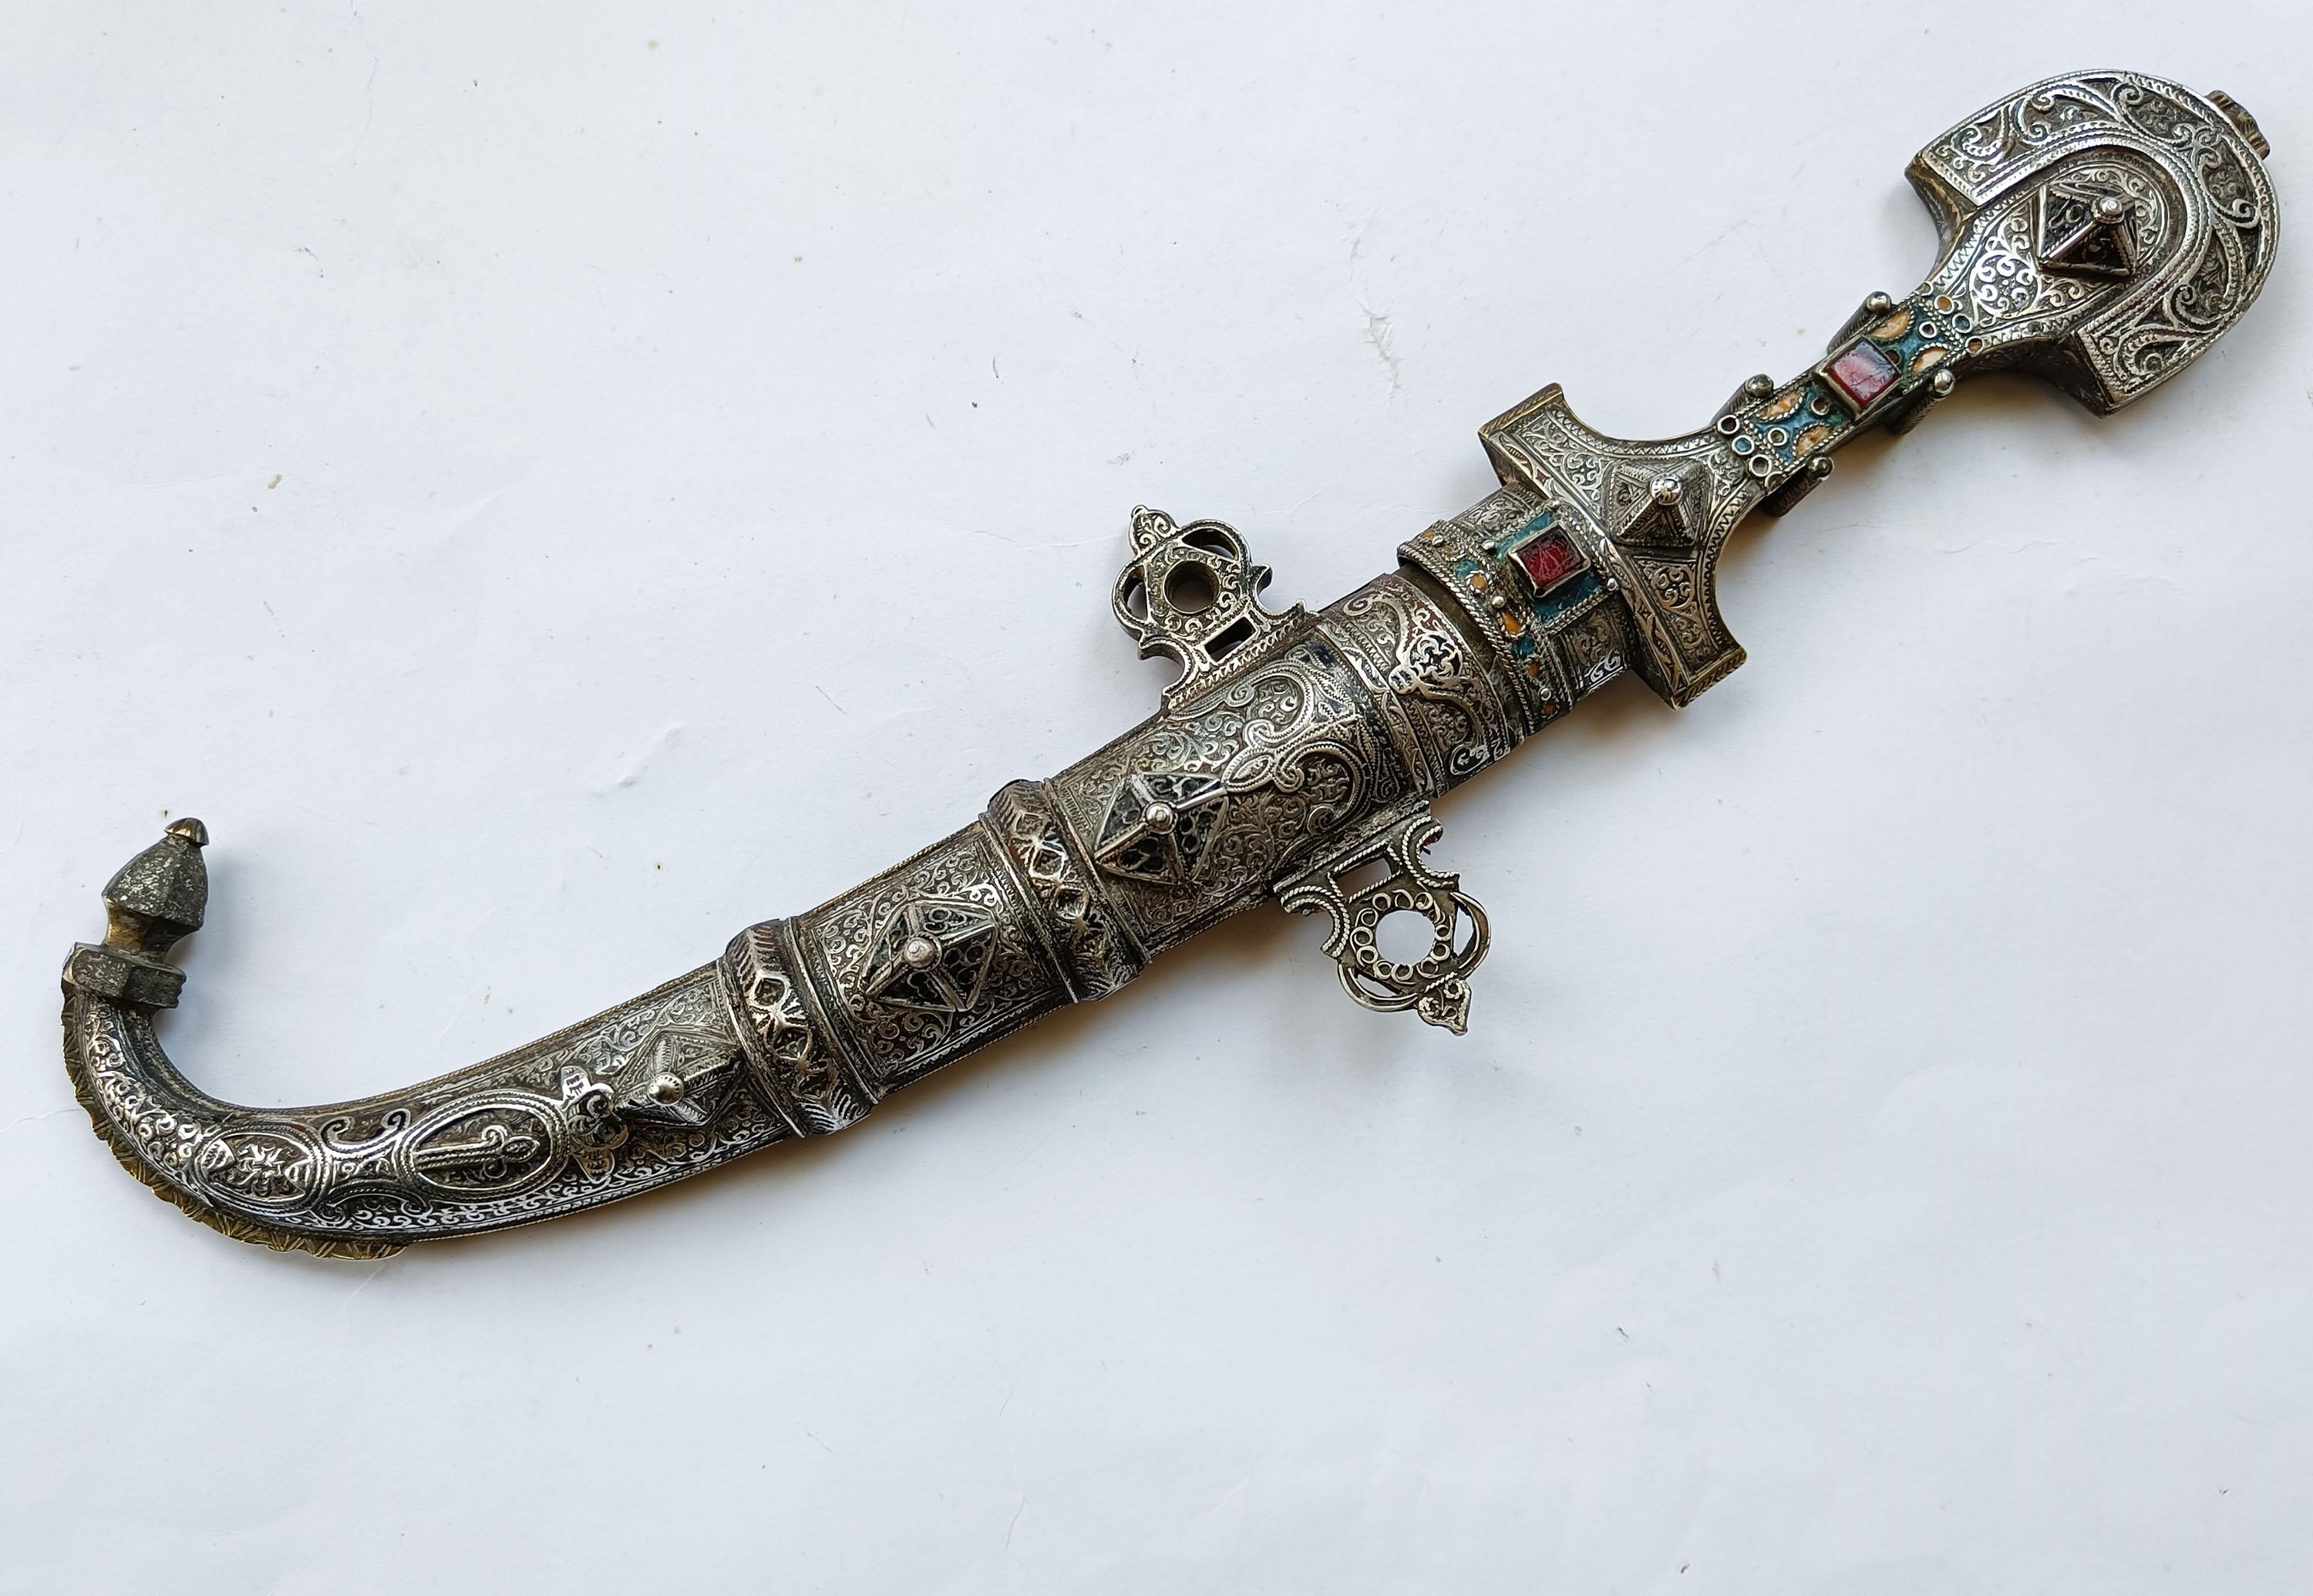 Superb Antique Moroccan Koumiya Berber Dagger
 
A rare and superb example of a Moroccan Koumiya Berber Dagger with highly ornate silver and brass work  and gem stones. 
period 19th century
Height 38 cm


   